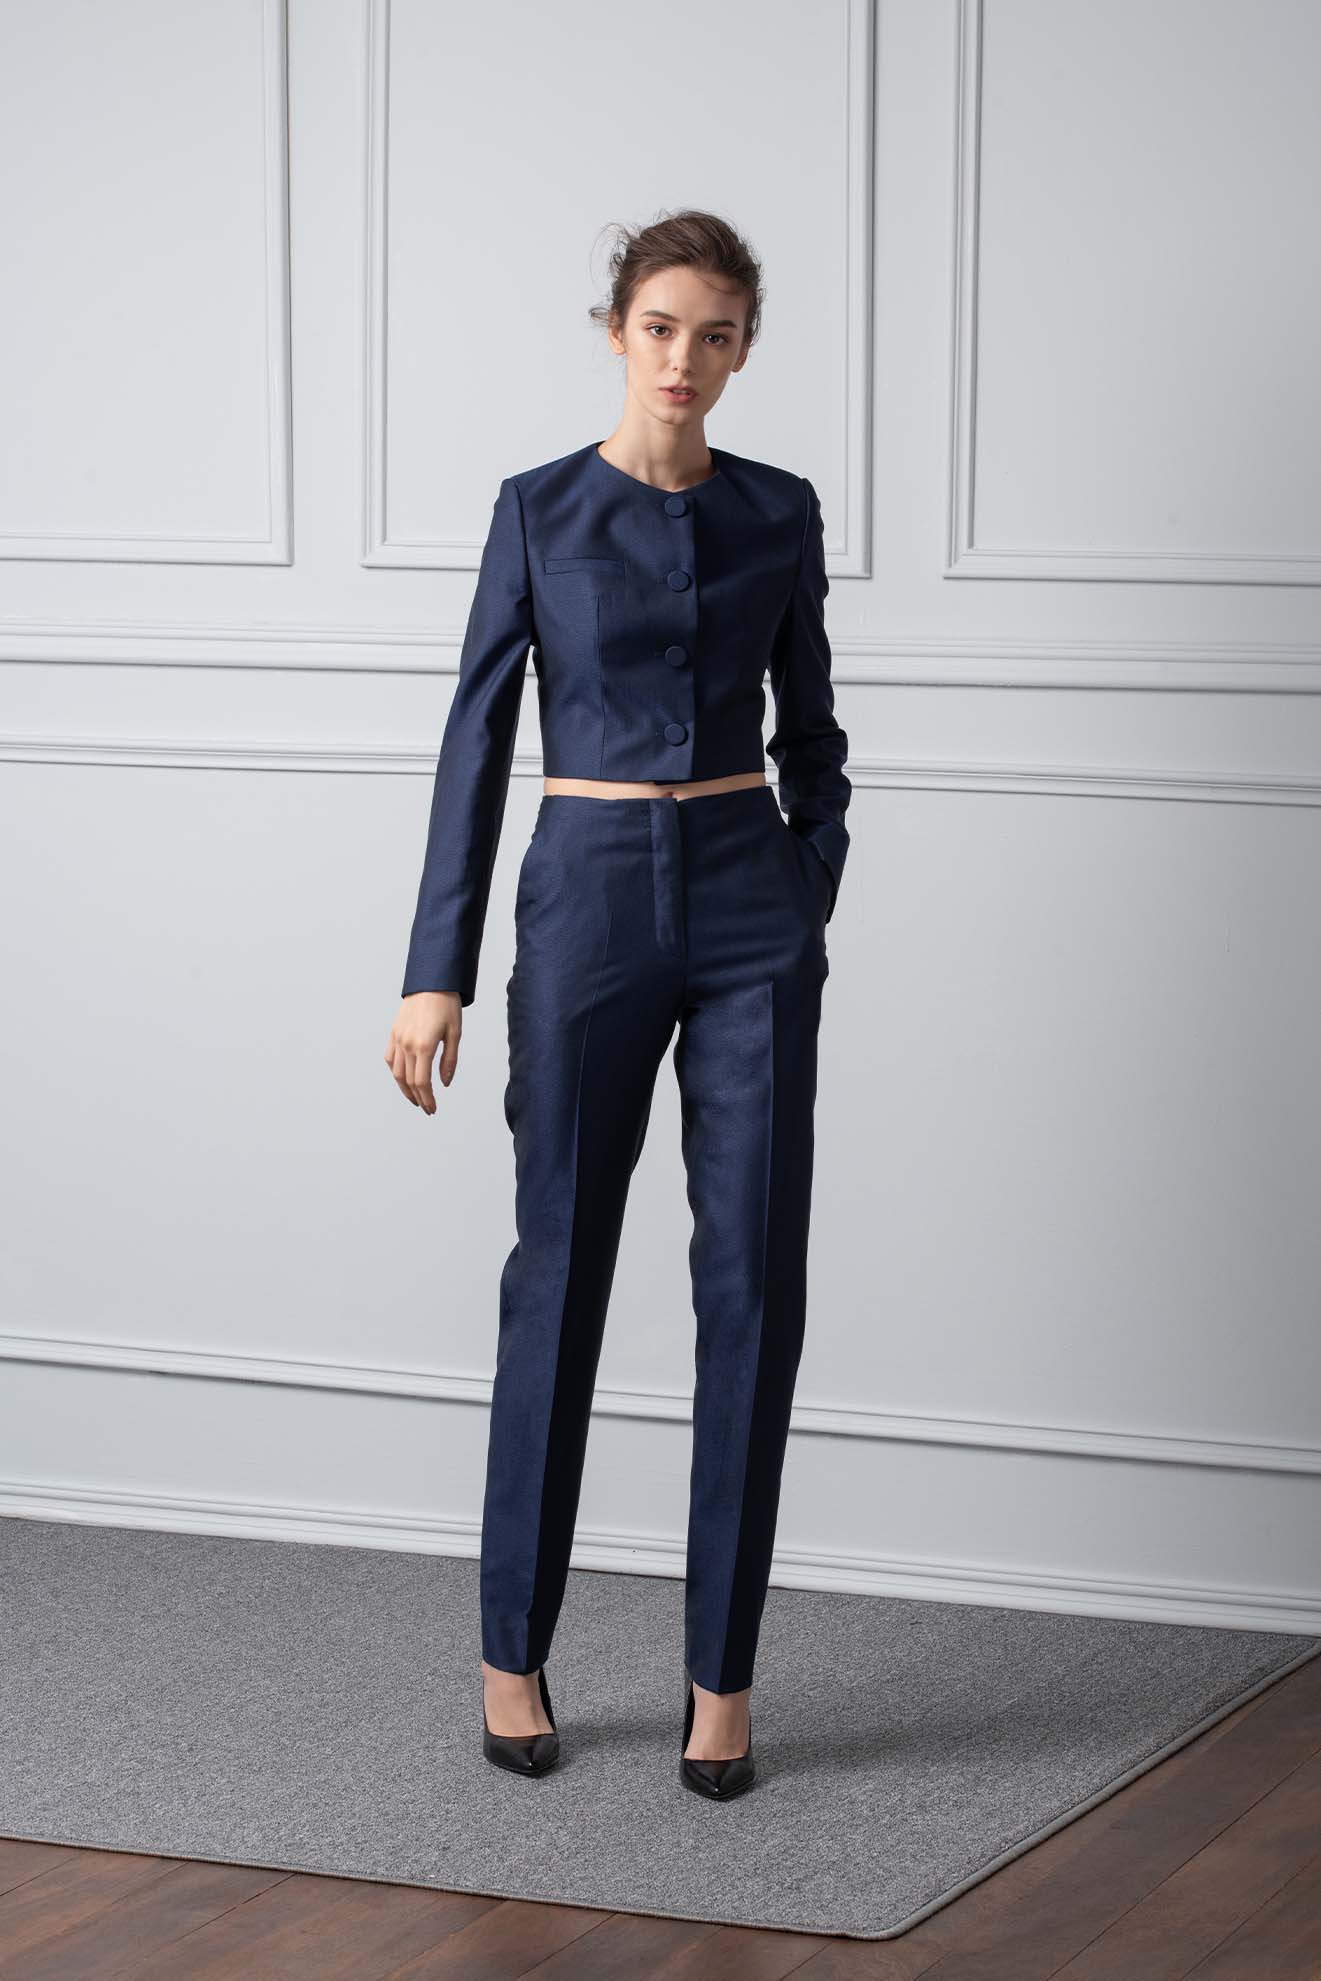 17 Chic, Comfortable Pants for Women to Wear While Working From Home | Vogue